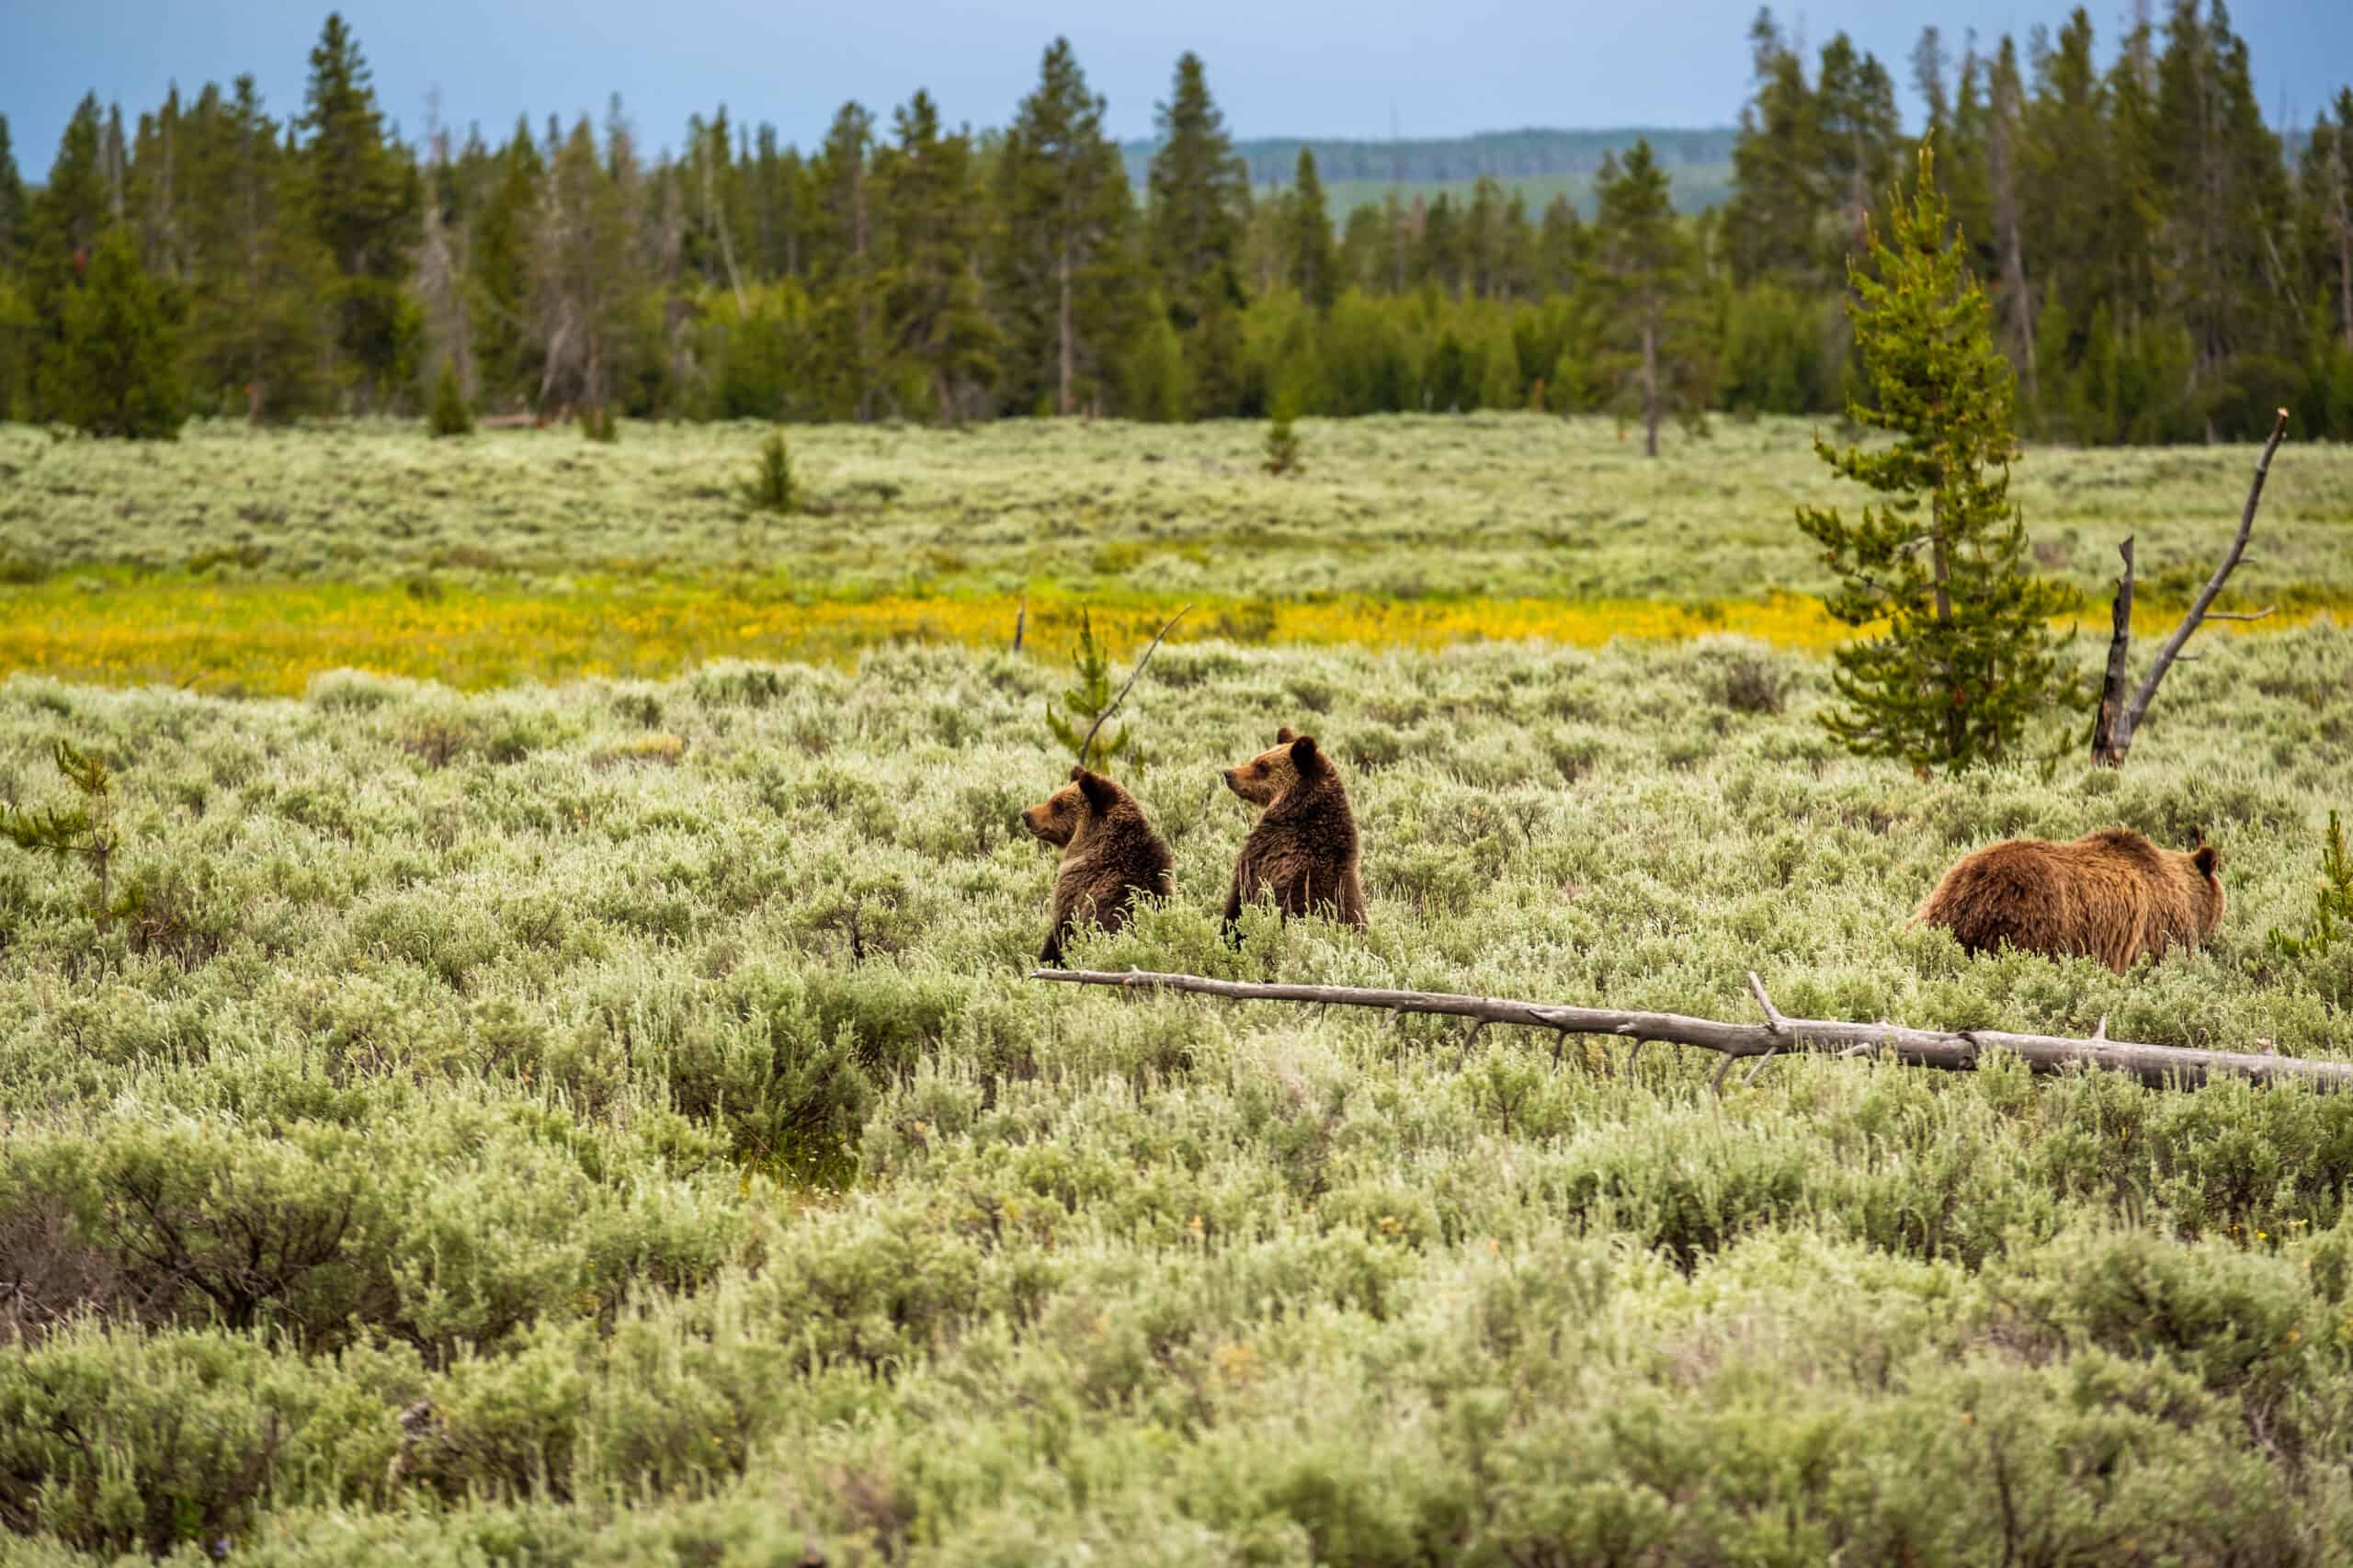 Grizzly bear in Yellowstone National Park, Wyoming, USA. Image by haveseen on depositphotos.